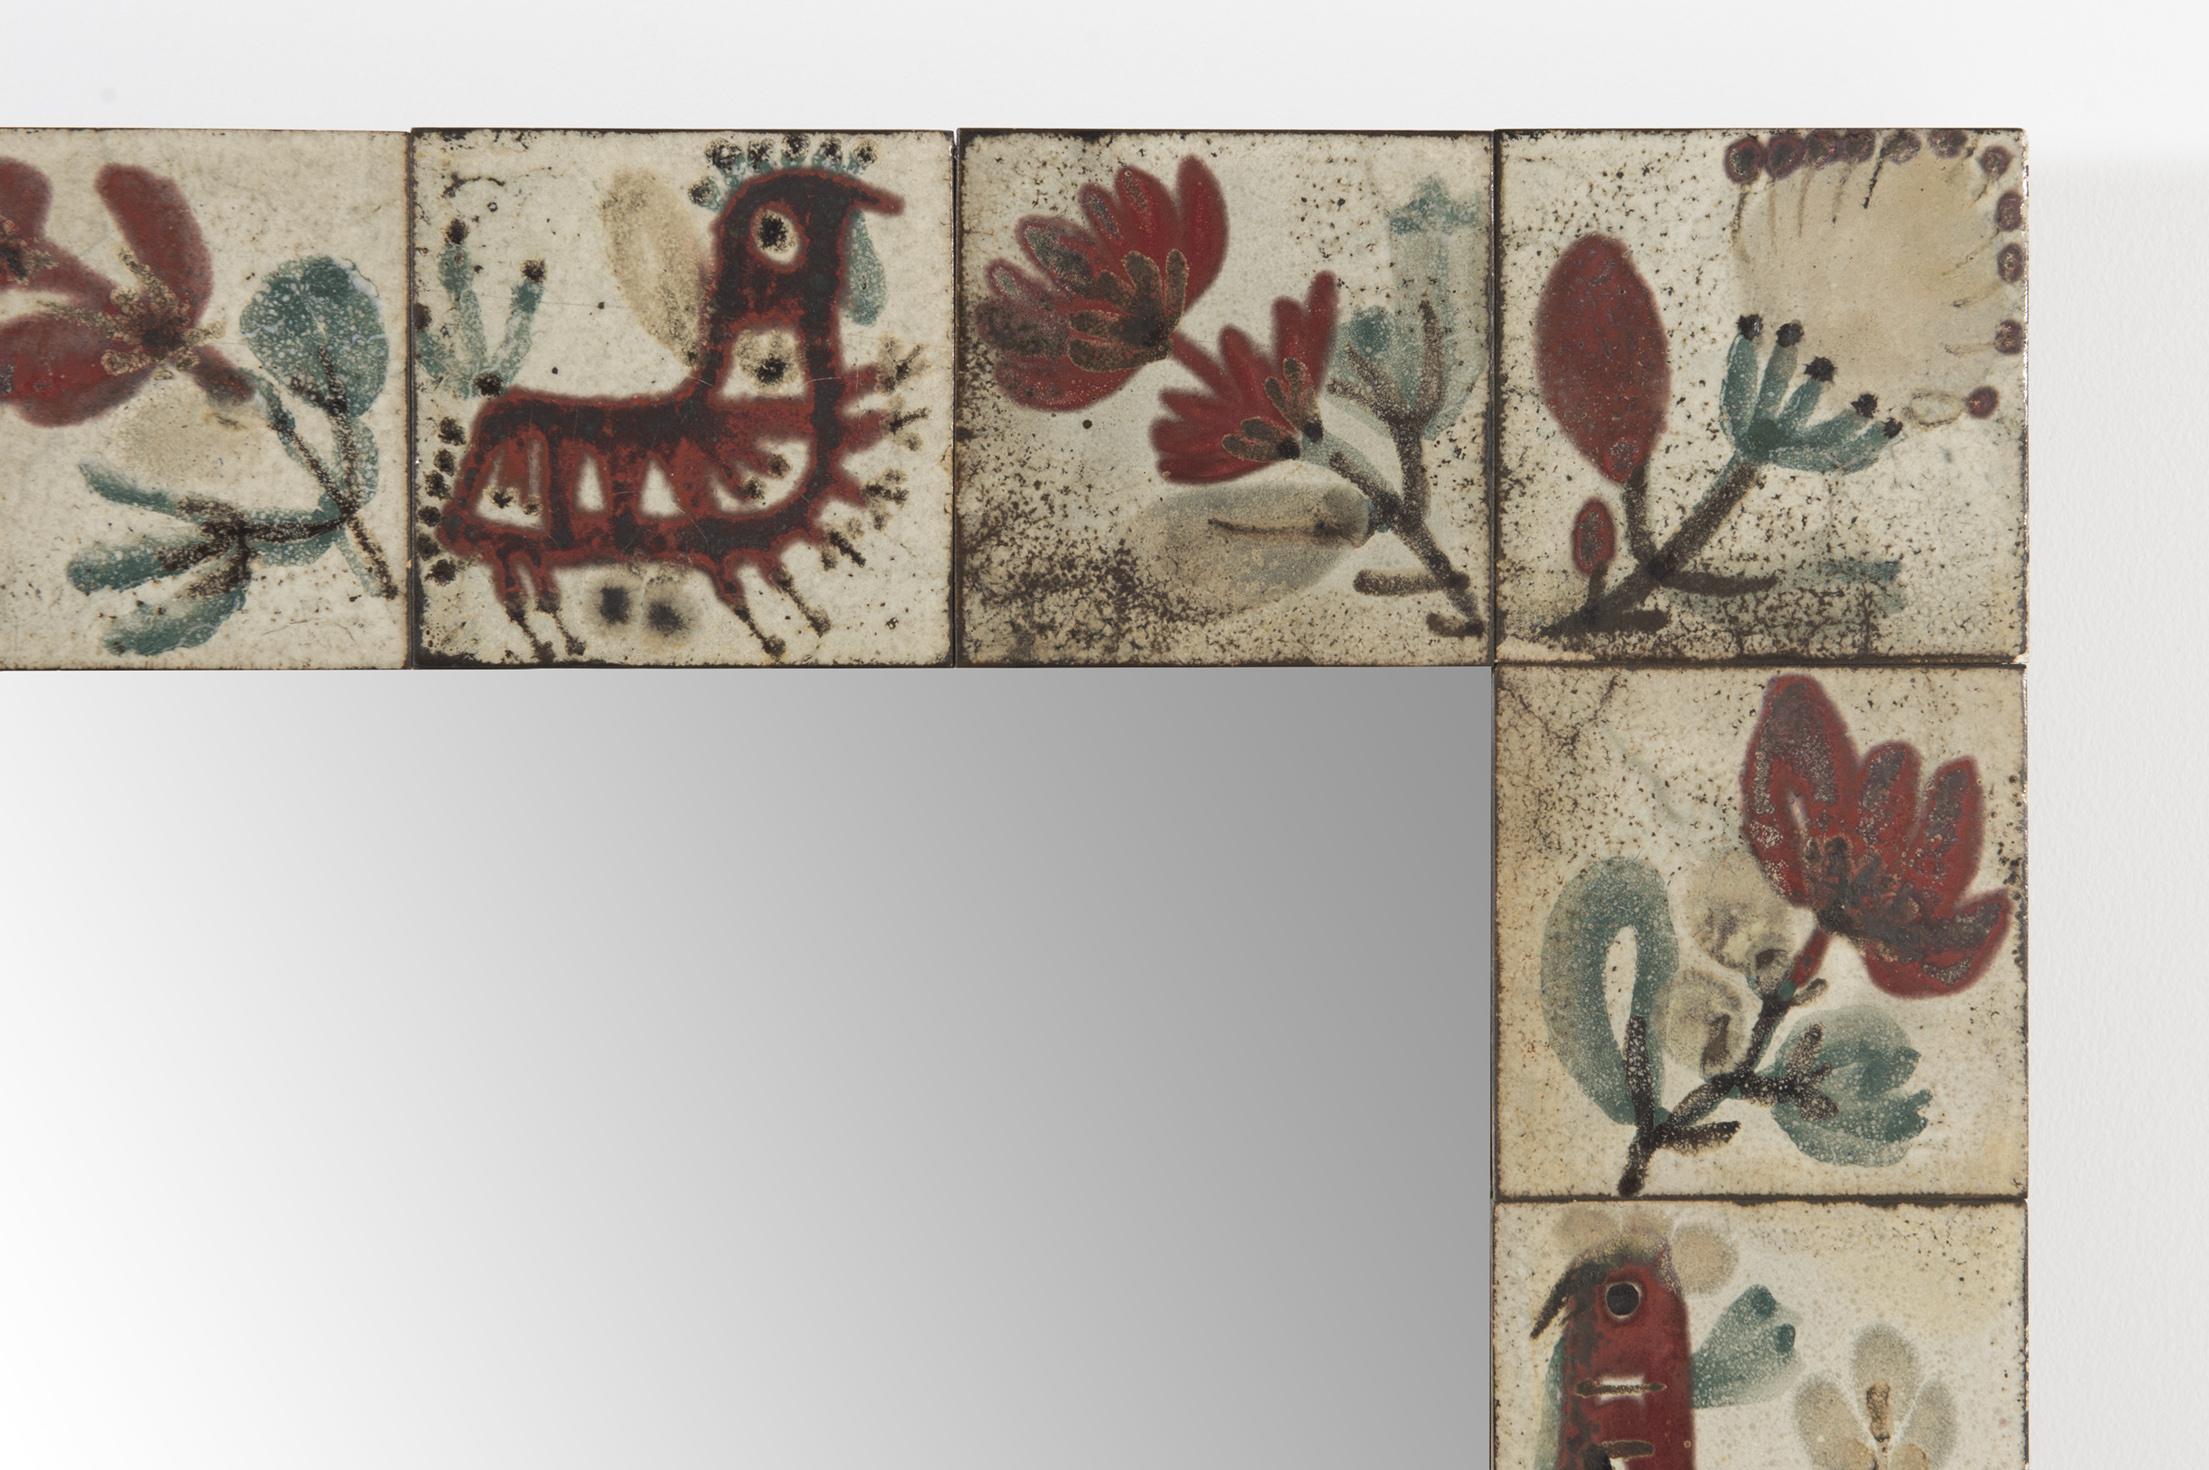 Mirror framed with polychrome ceramic tiles with motifs depicting a variety of flowers and imaginary animals. The colours used are the typical green and dark red and the style is 